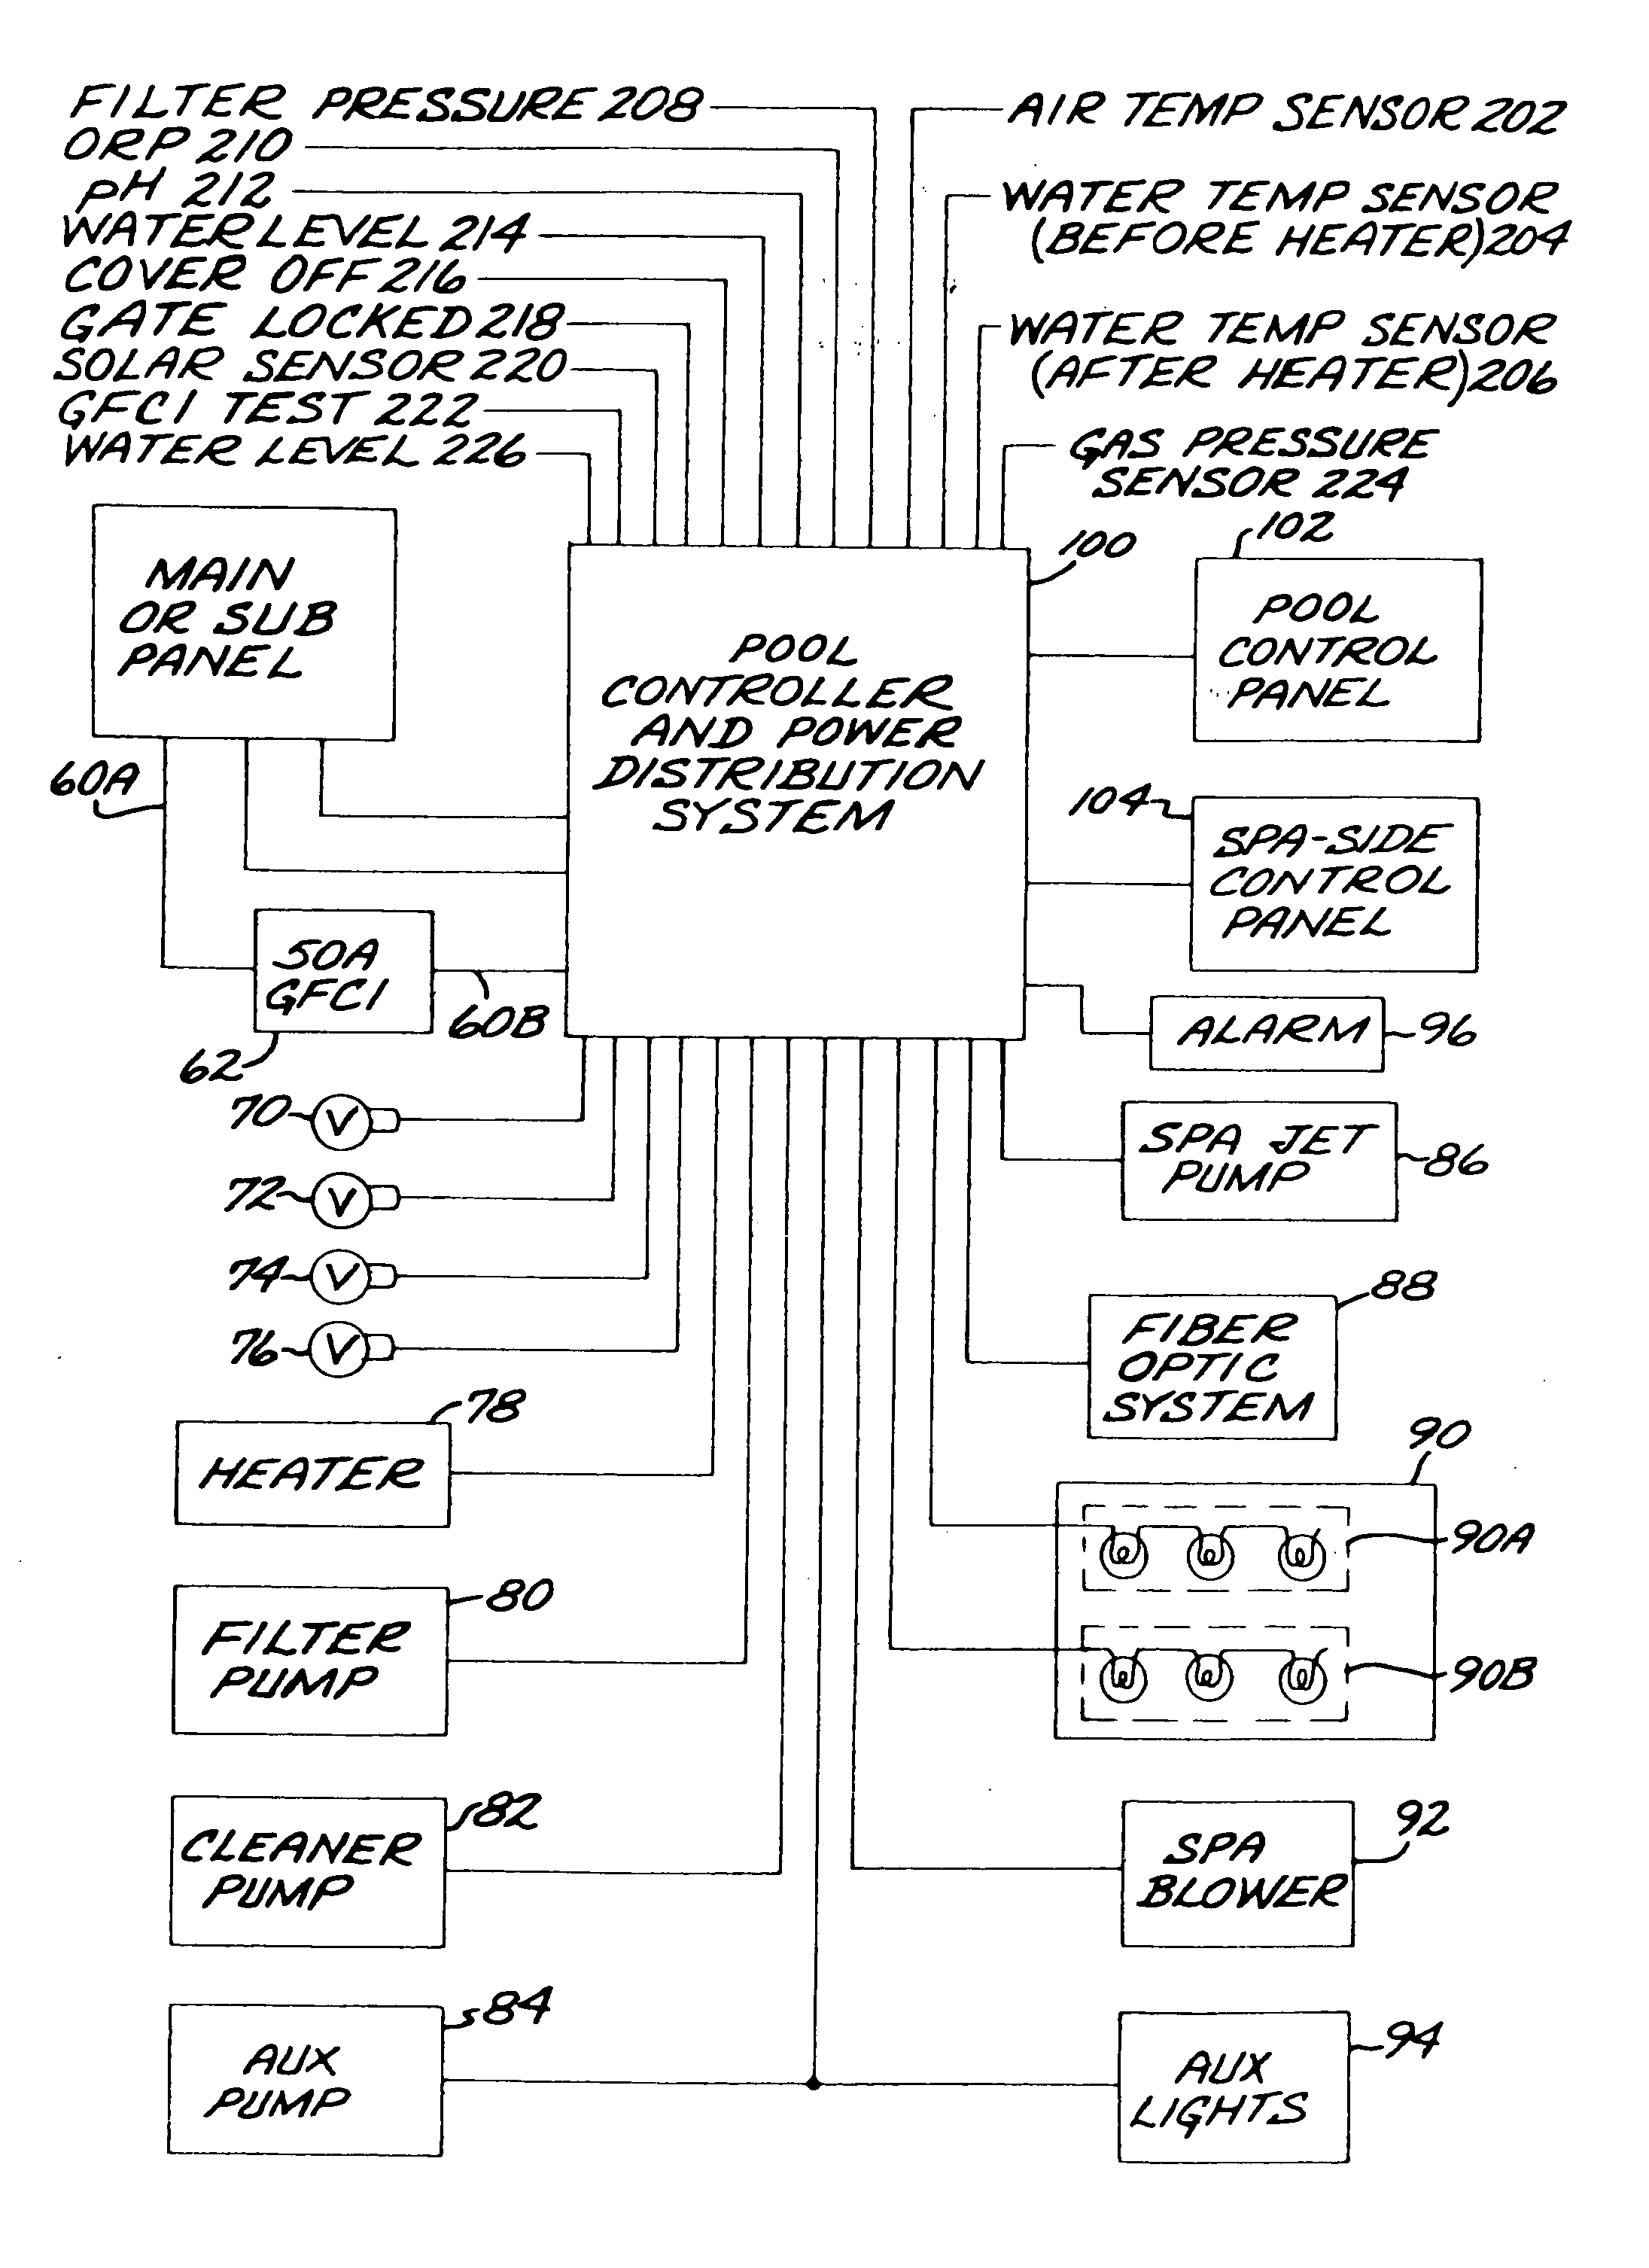 Controller system for pool and/or spa